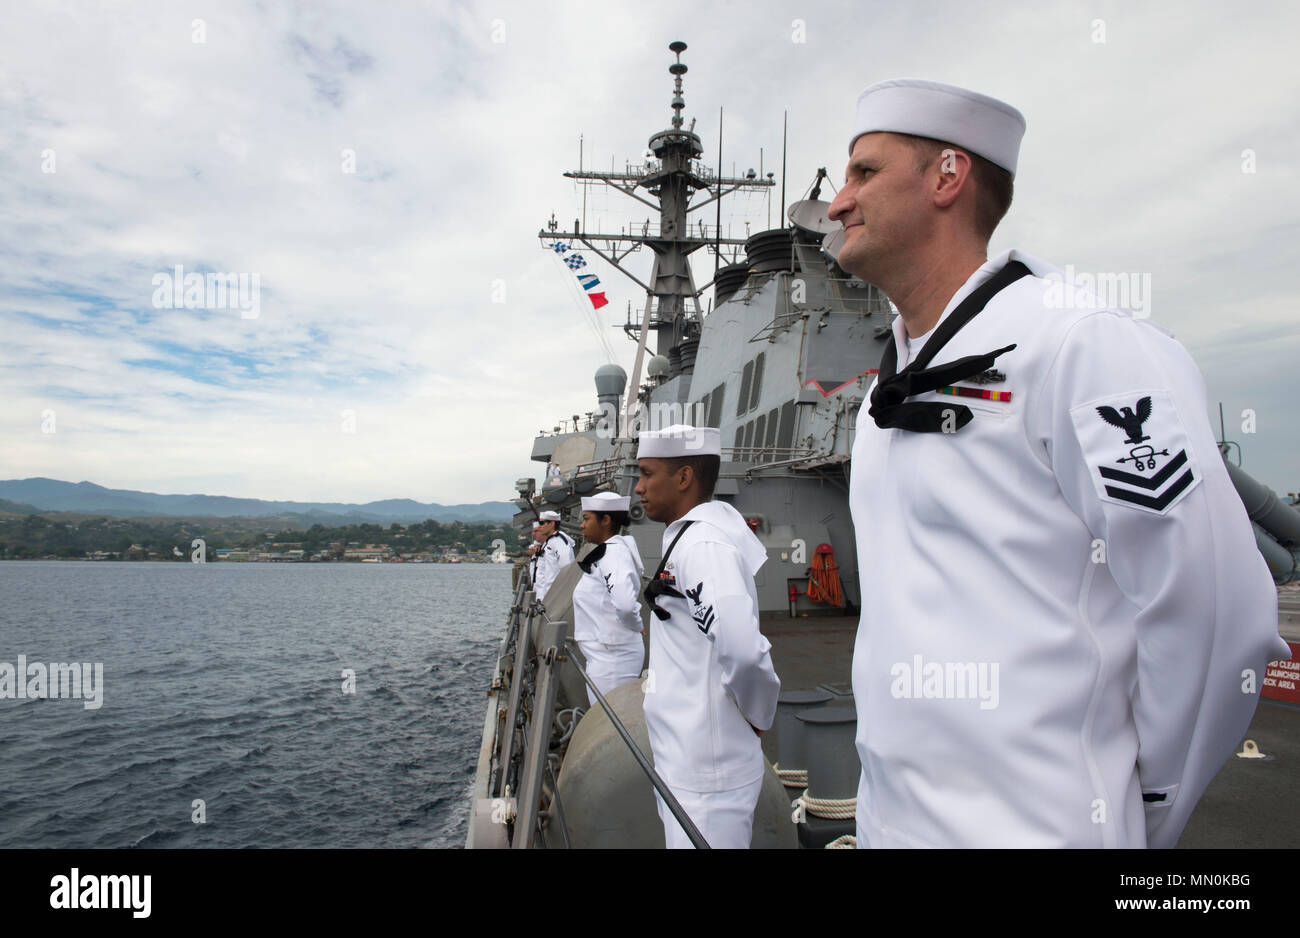 HONIARA, Guadalcanal (Aug. 4, 2017) Sonar Technician (Surface) 2nd Class Matthew Fryer, assigned to the Arleigh Burke-class guided-missile destroyer USS Barry (DDG 52), stands at parade rest while pulling into Guadalcanal for a port visit to commemorate the 75th anniversary of the Guadalcanal Campaign. The 75th commemoration is a tribute to courage, service, and sacrifice of those who fought in the Guadalacanal Campaign of World War II. (U.S. Navy photo by Mass Communication Specialist 2nd Class William Collins III/Released) Stock Photo